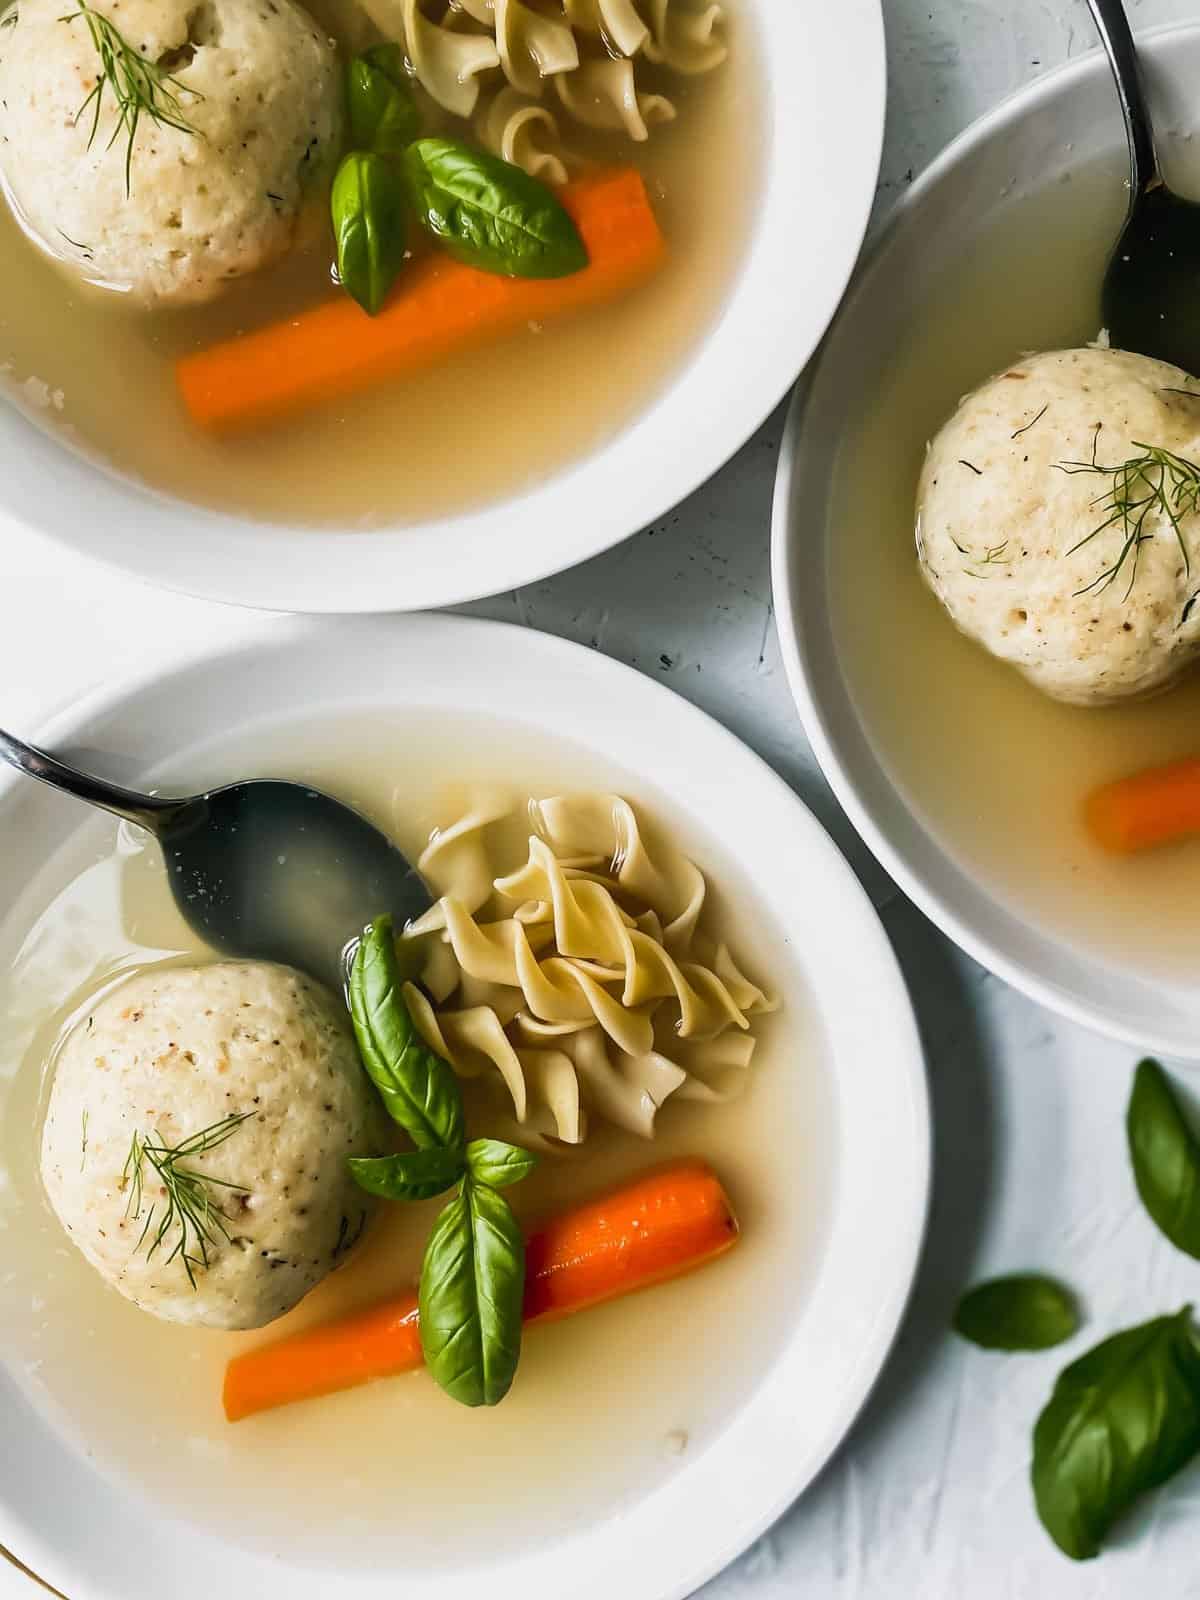 3 bowls of matzo ball soup in white bowls with spoons, carrots, and noodles